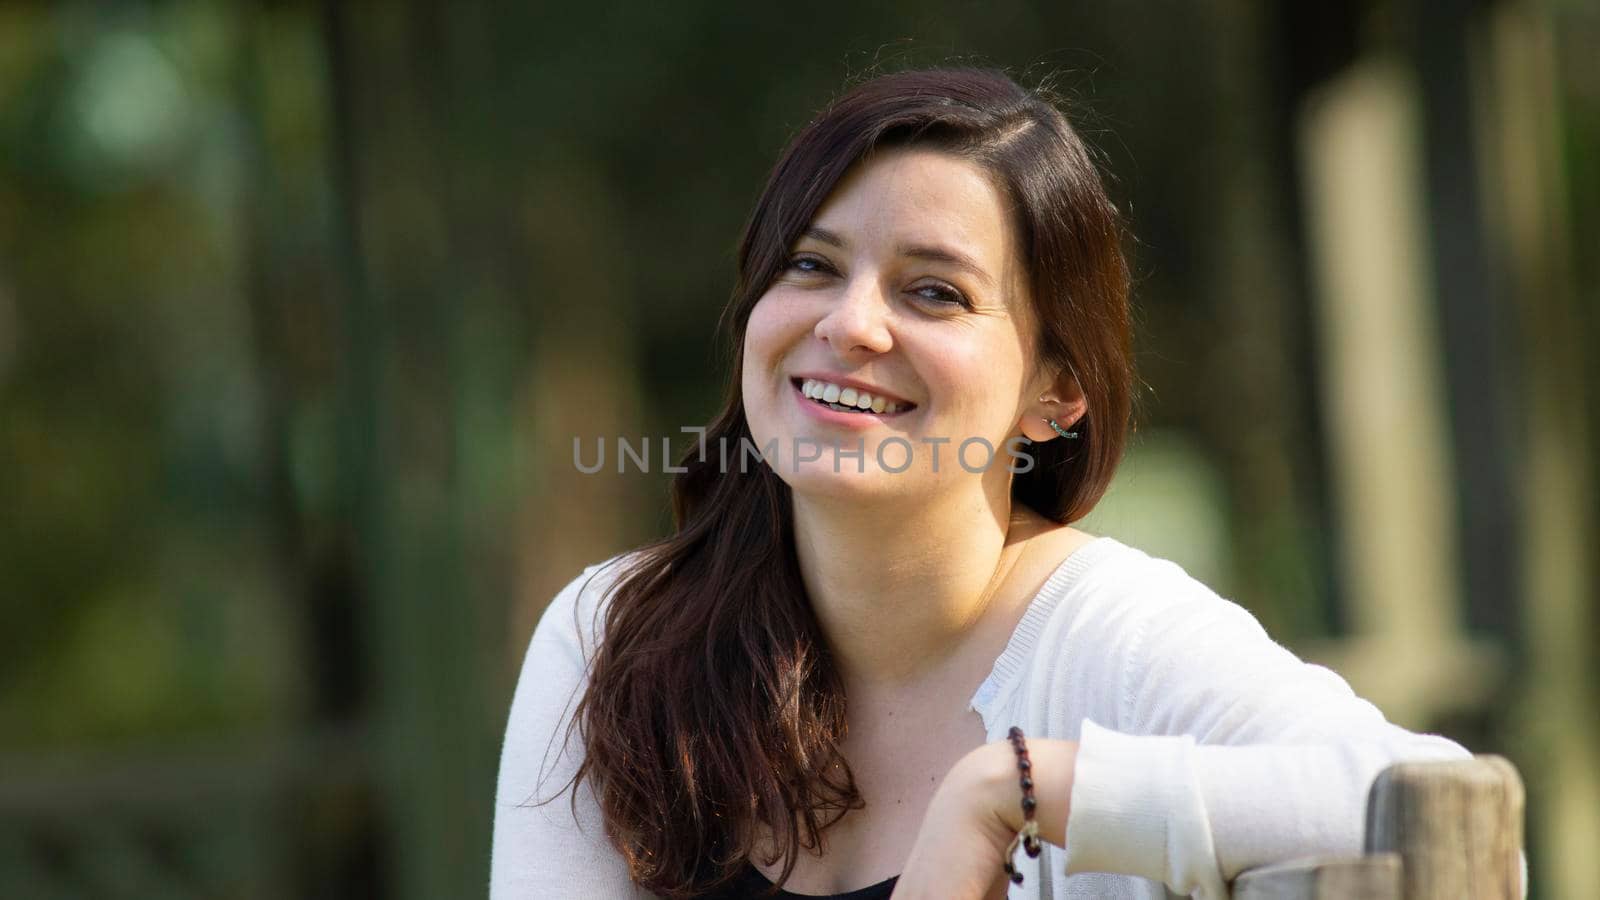 Portrait of a beautiful young Hispanic woman in the middle of a park with a very cheerful attitude against a background of unfocused green trees during sunset